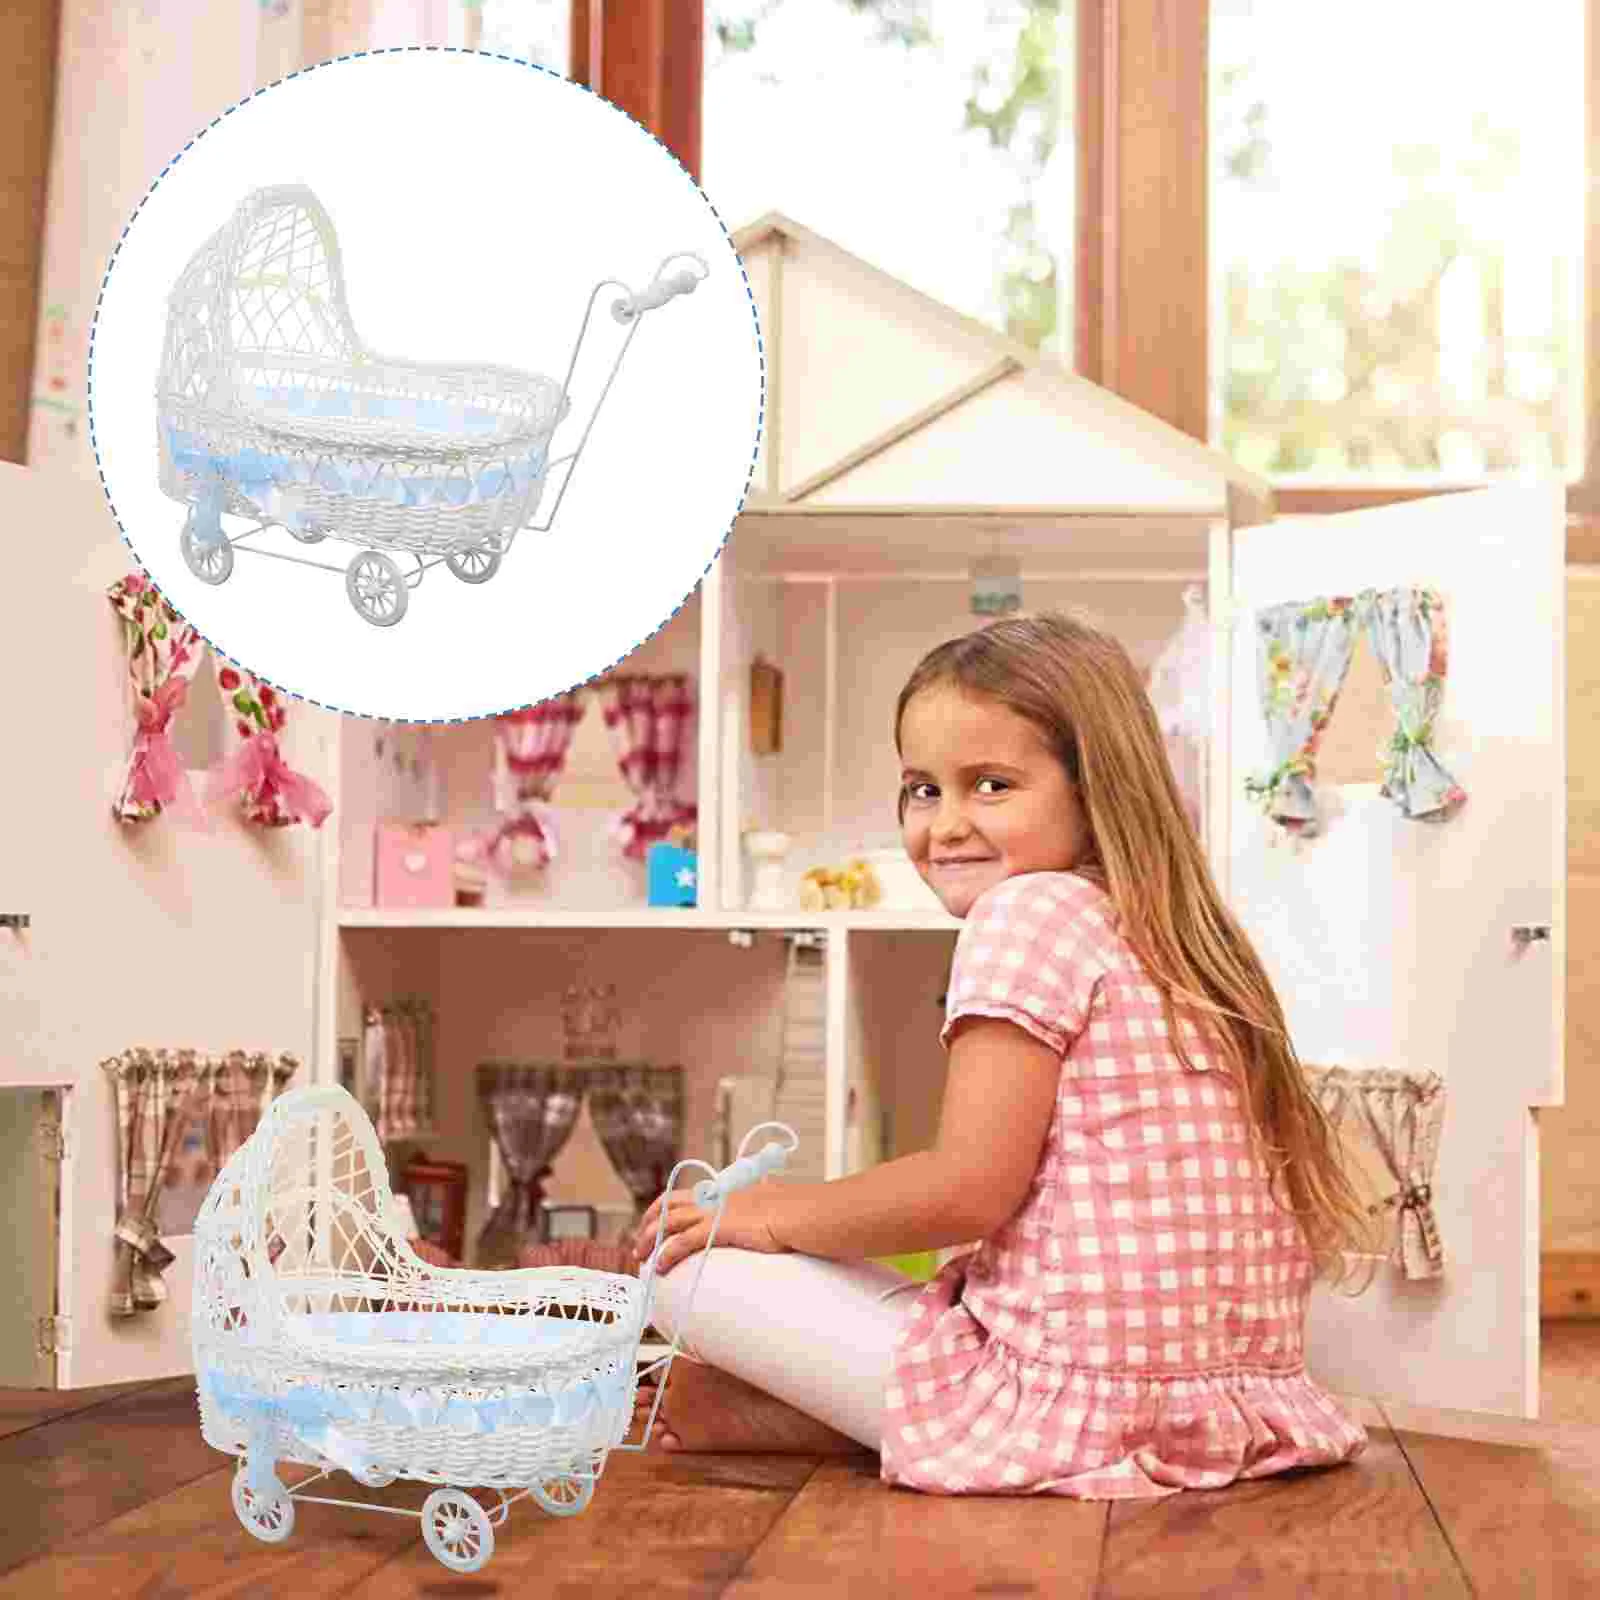 

Basket Baby Flower Shower Party Candy Box Wedding Decorations Woven Stroller Favors Baskets Gift Carriage Mini Storage Favor